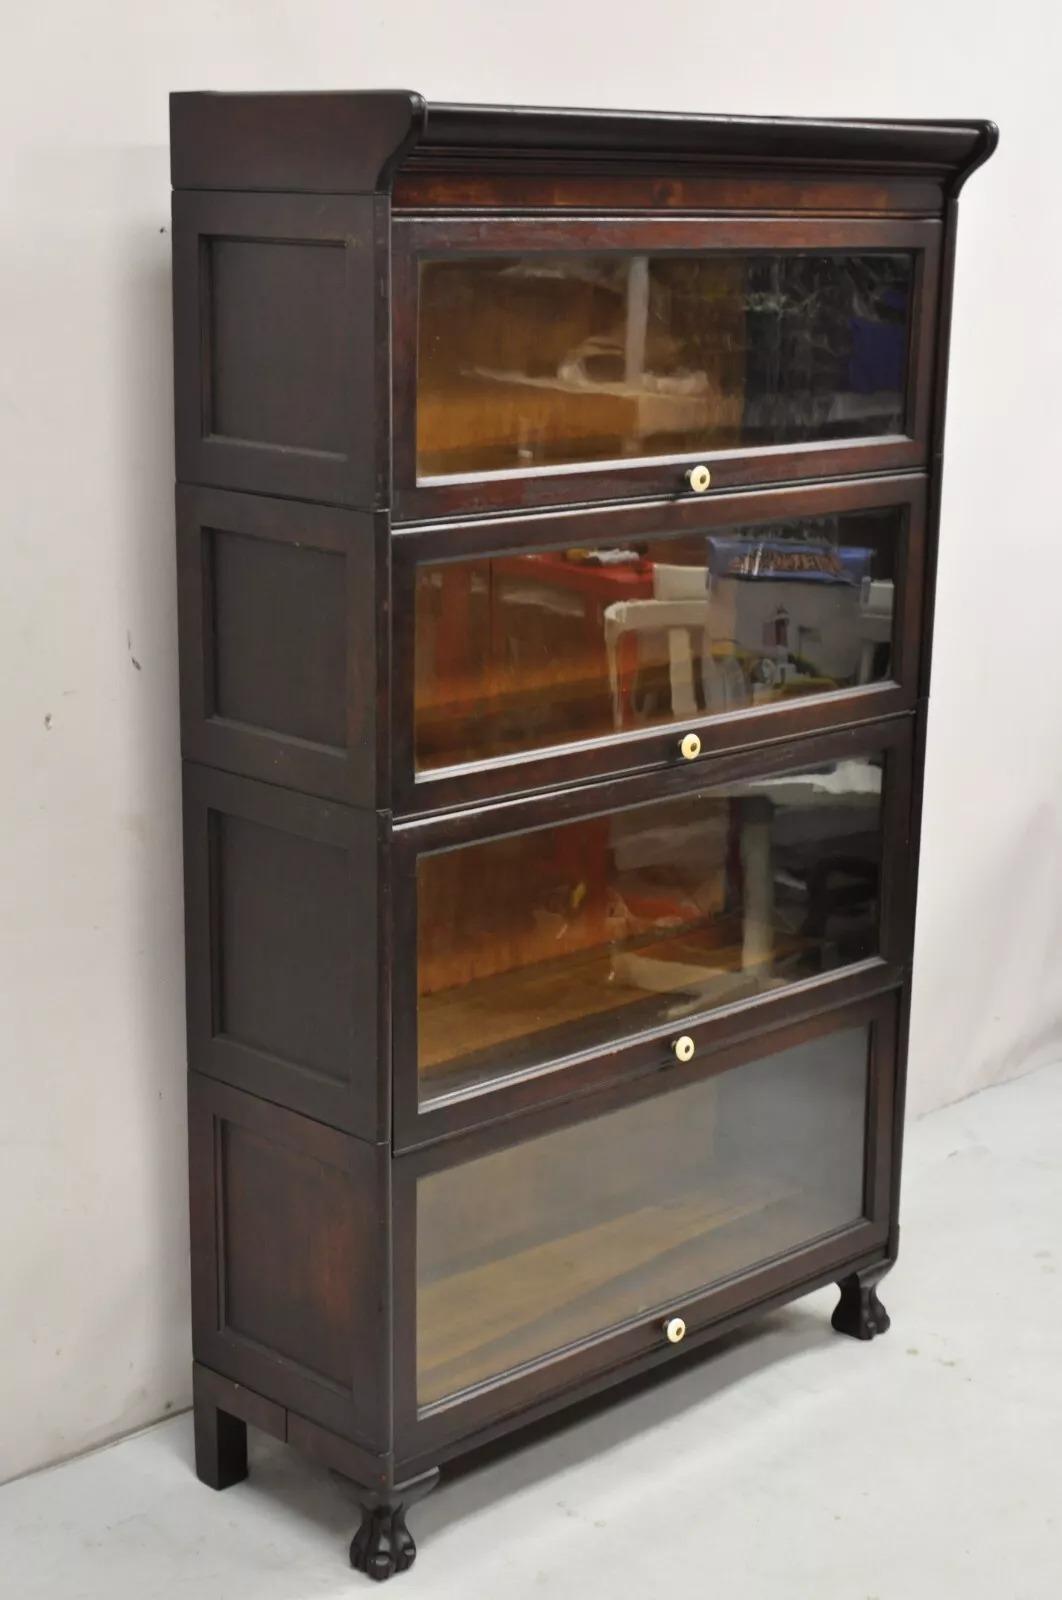 Antique American Empire Style Mahogany 4 Section Stacking Barrister Bookcase. Item features carved paw feet, 4 glass doors, stacking form, very nice antique bookcase. Top 2 sections are 11